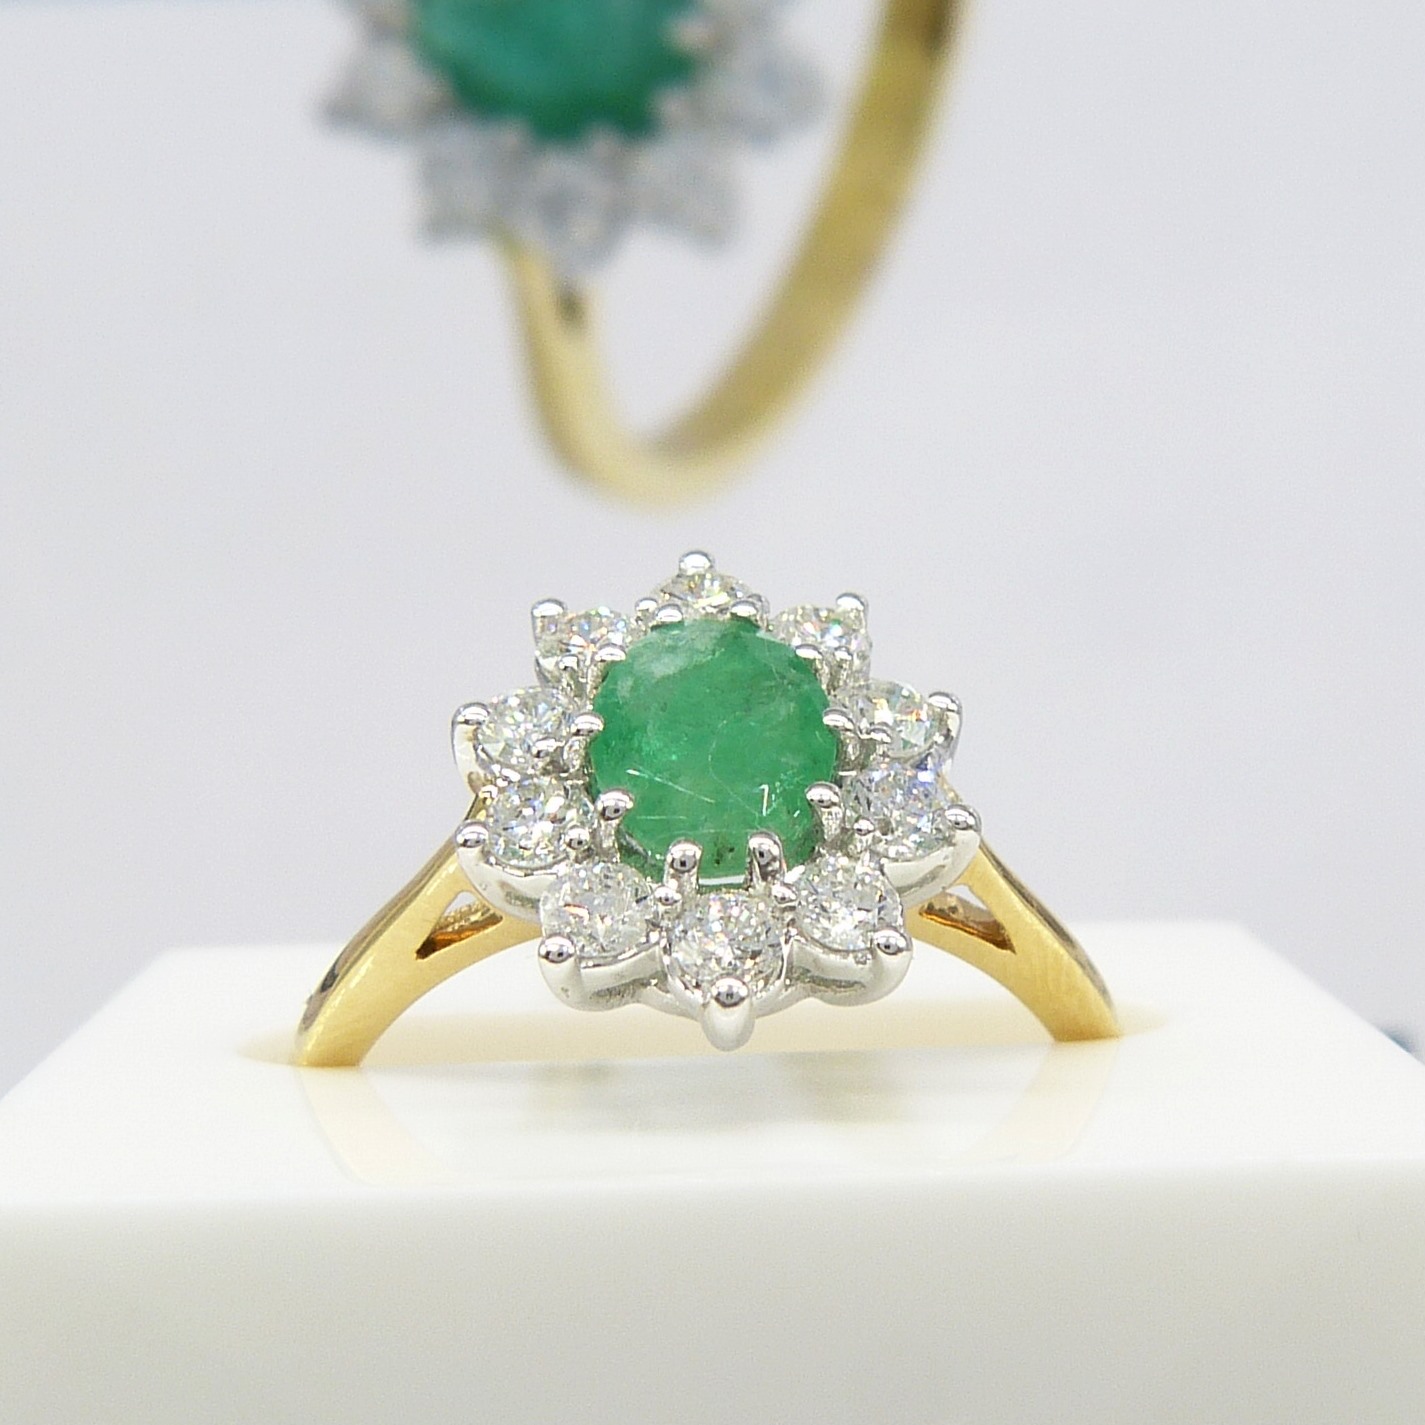 A certificated 18ct yellow Gold oval Emerald gemstone and round brilliant-cut Diamond ring - Image 7 of 10